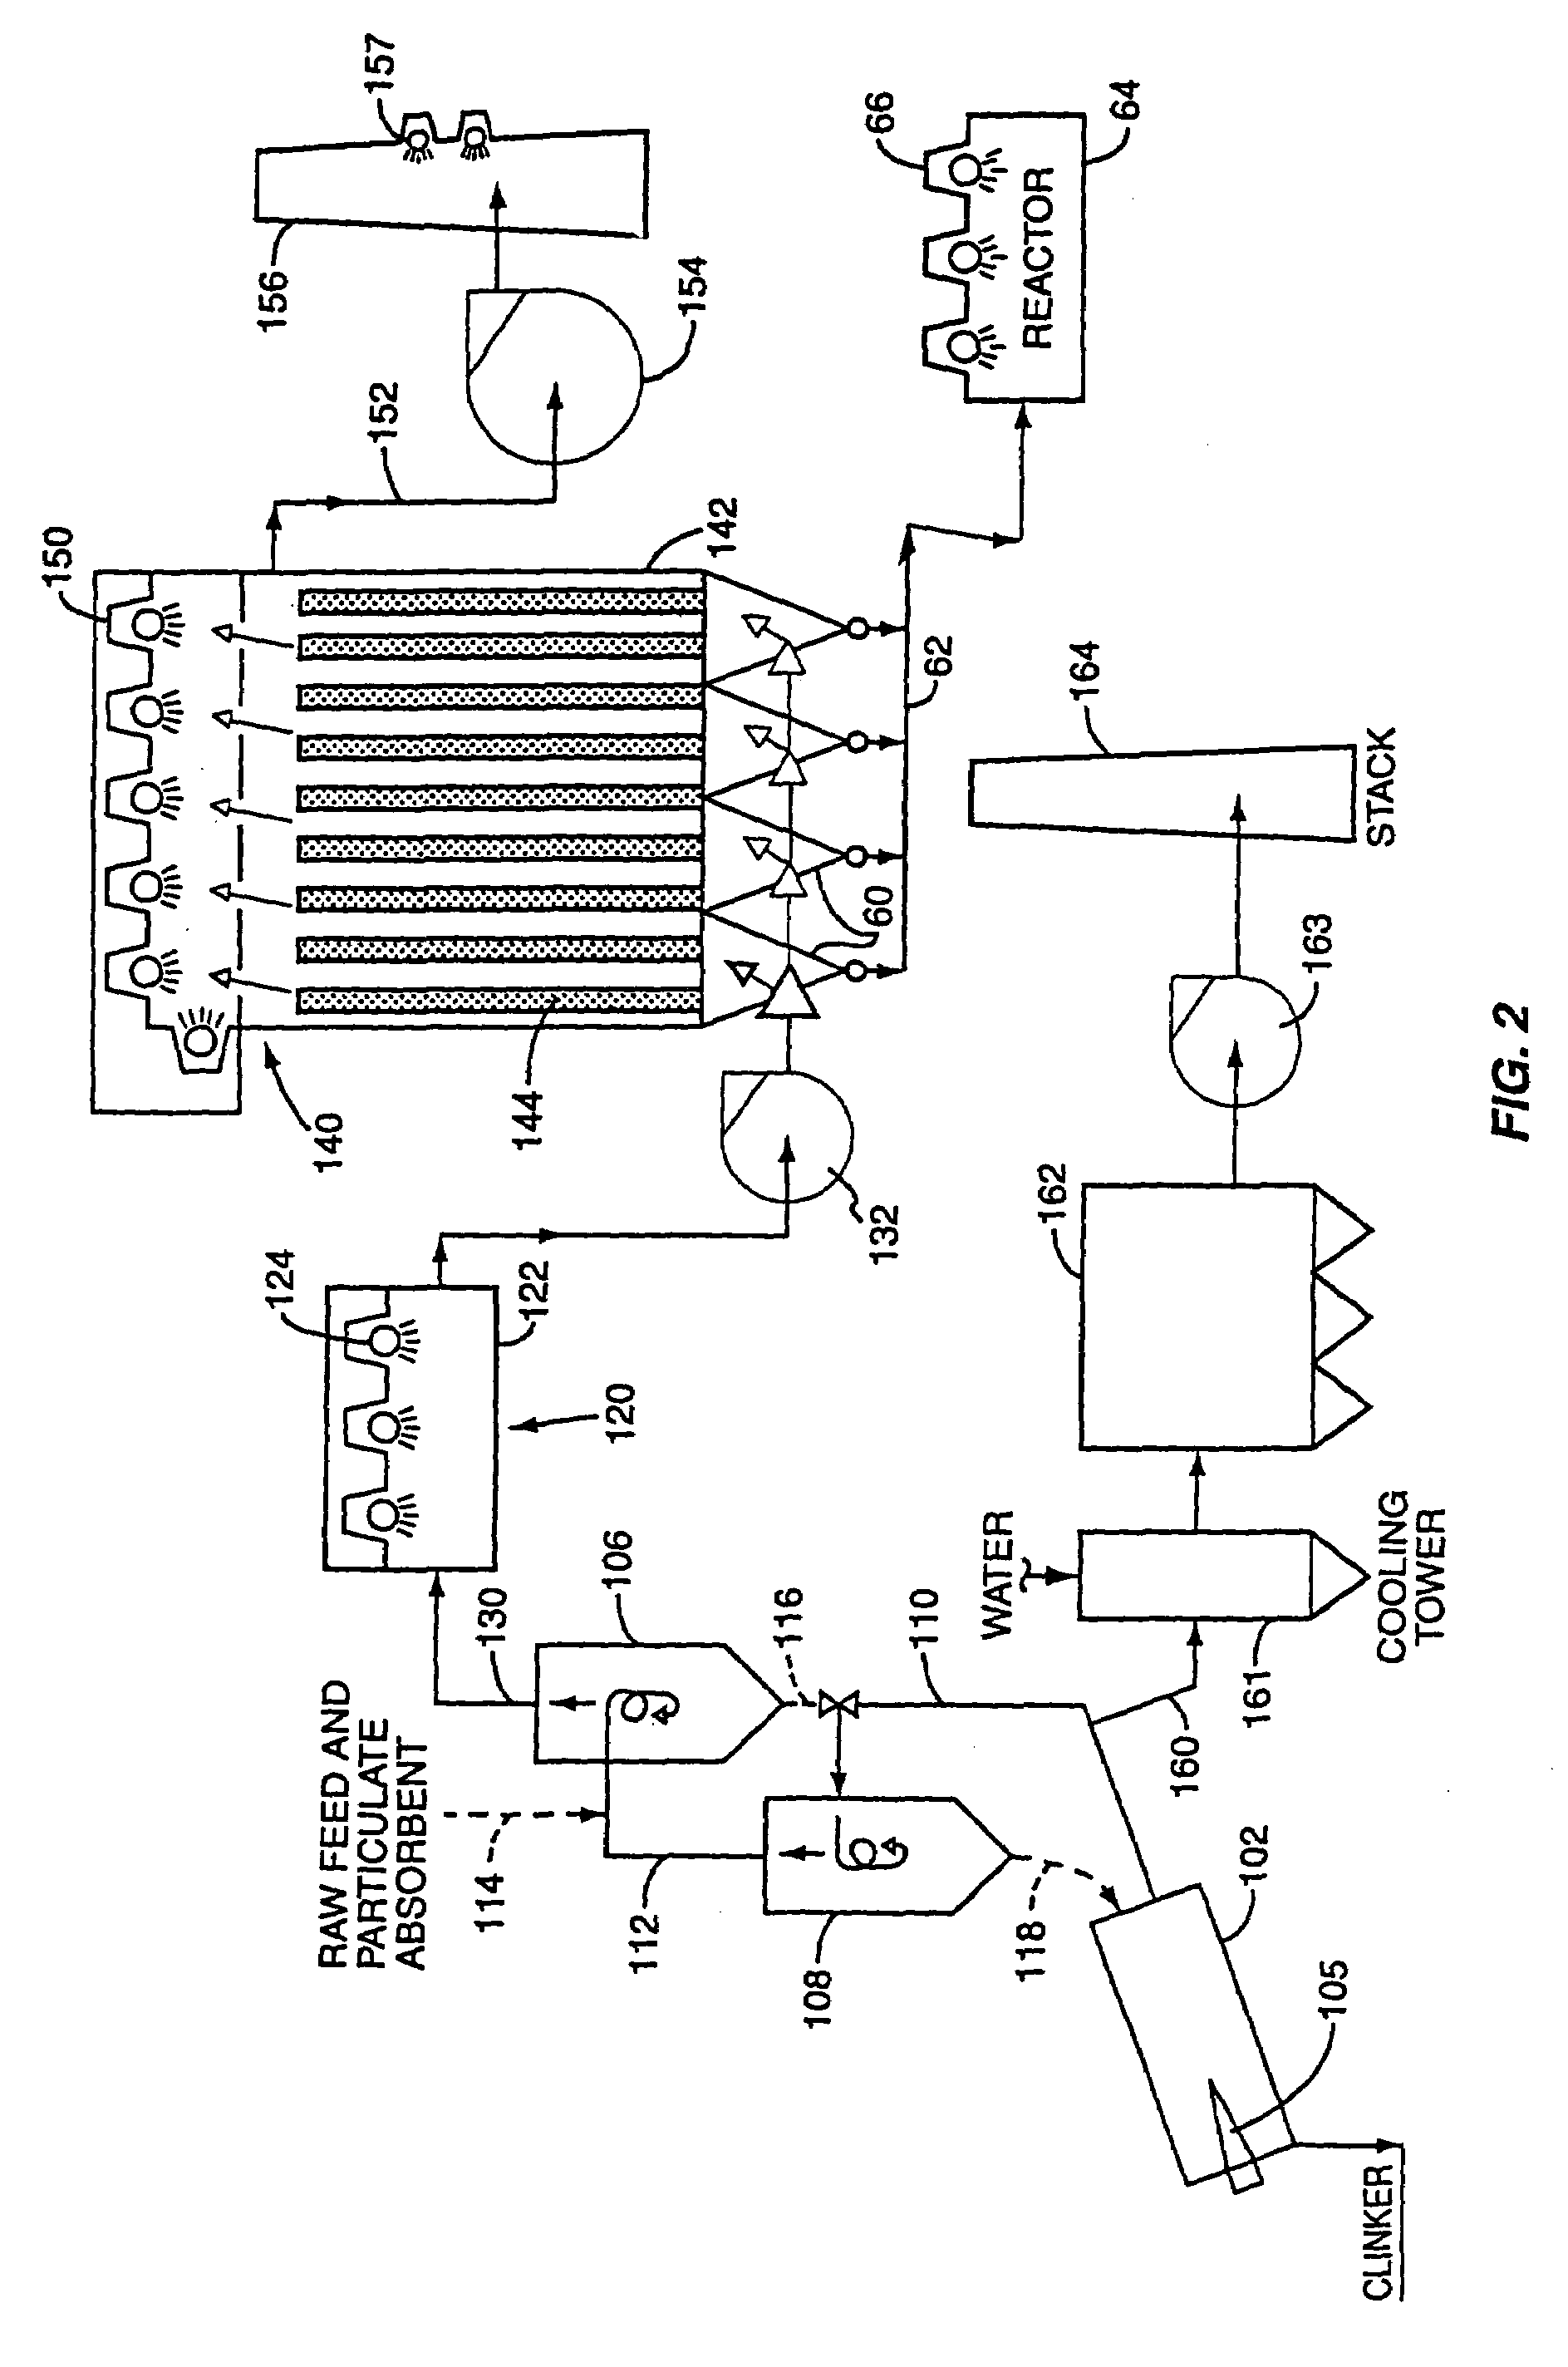 Method of photochemically removing ammonia from gas streams